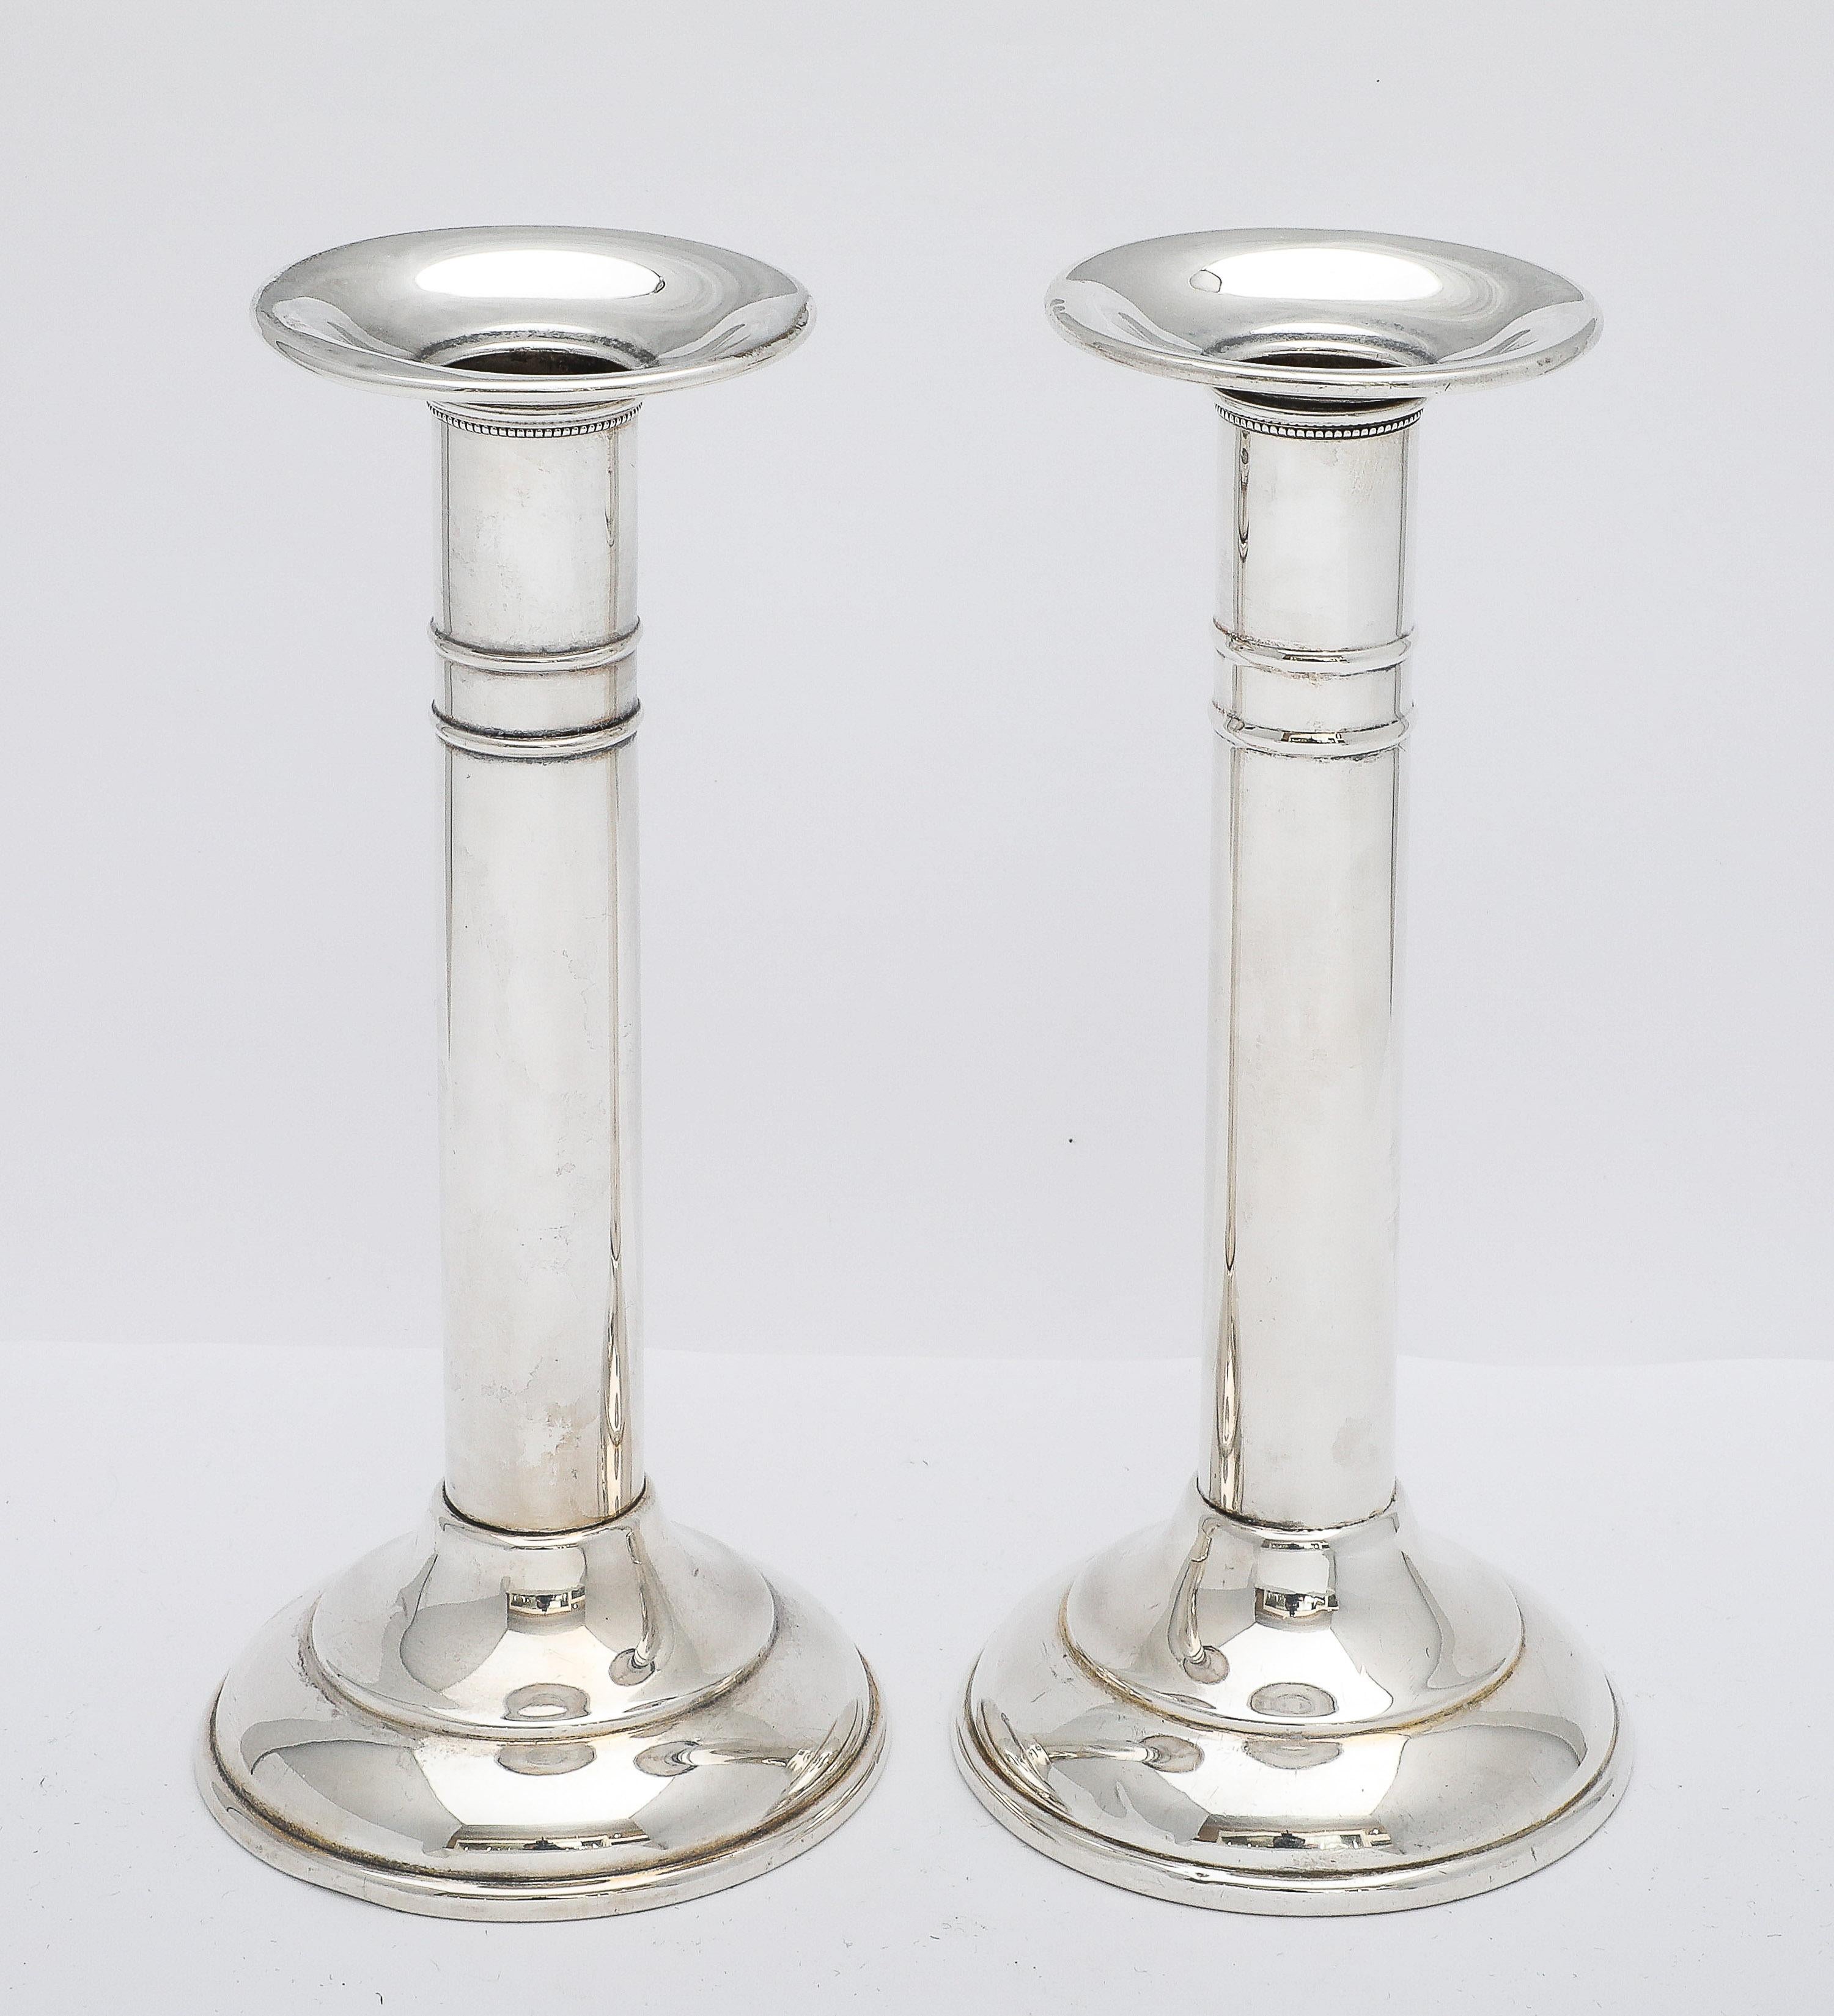 Pair of Edwardian Period, sterling silver candlesticks, Adelphi Silver Co., New York, Ca. 1915. Each candlestick measures over 6 1/2 inches high x 3 inches diameter (at widest point - across base). Each candlestick is weighted. There are some minor